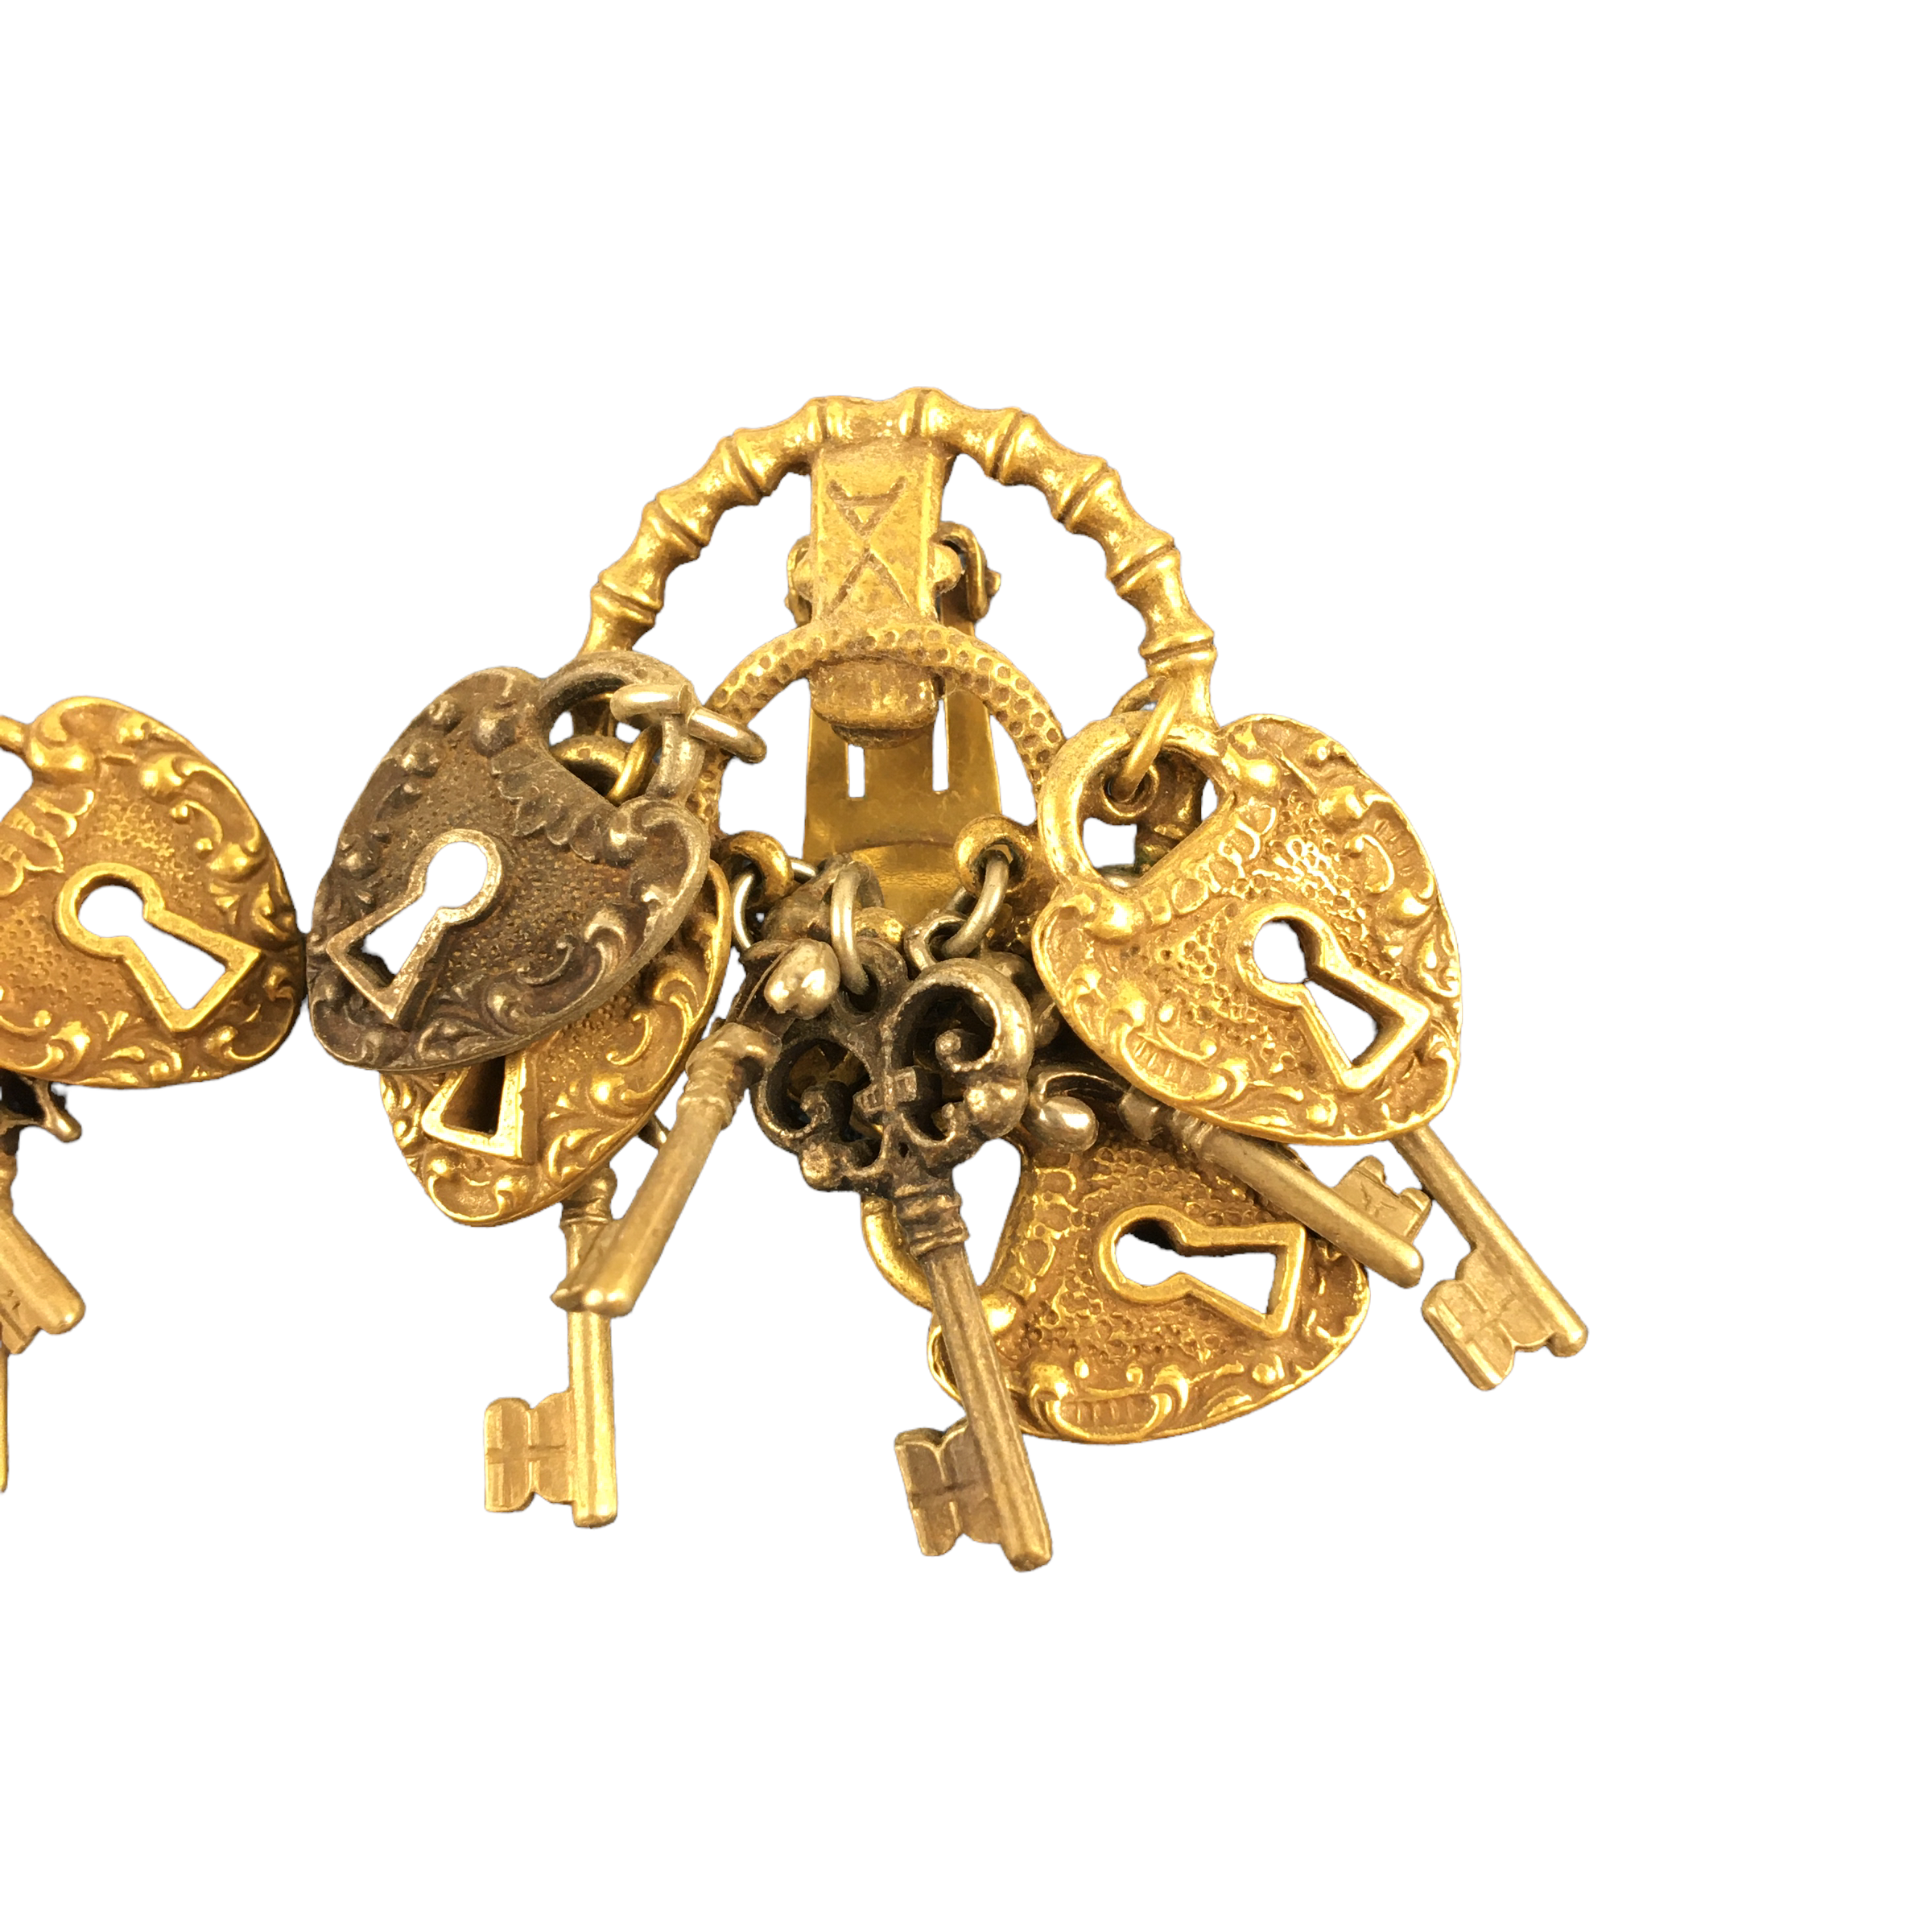 Chunky Lock and Key Charms Clip on Earrings Designer Signed Art